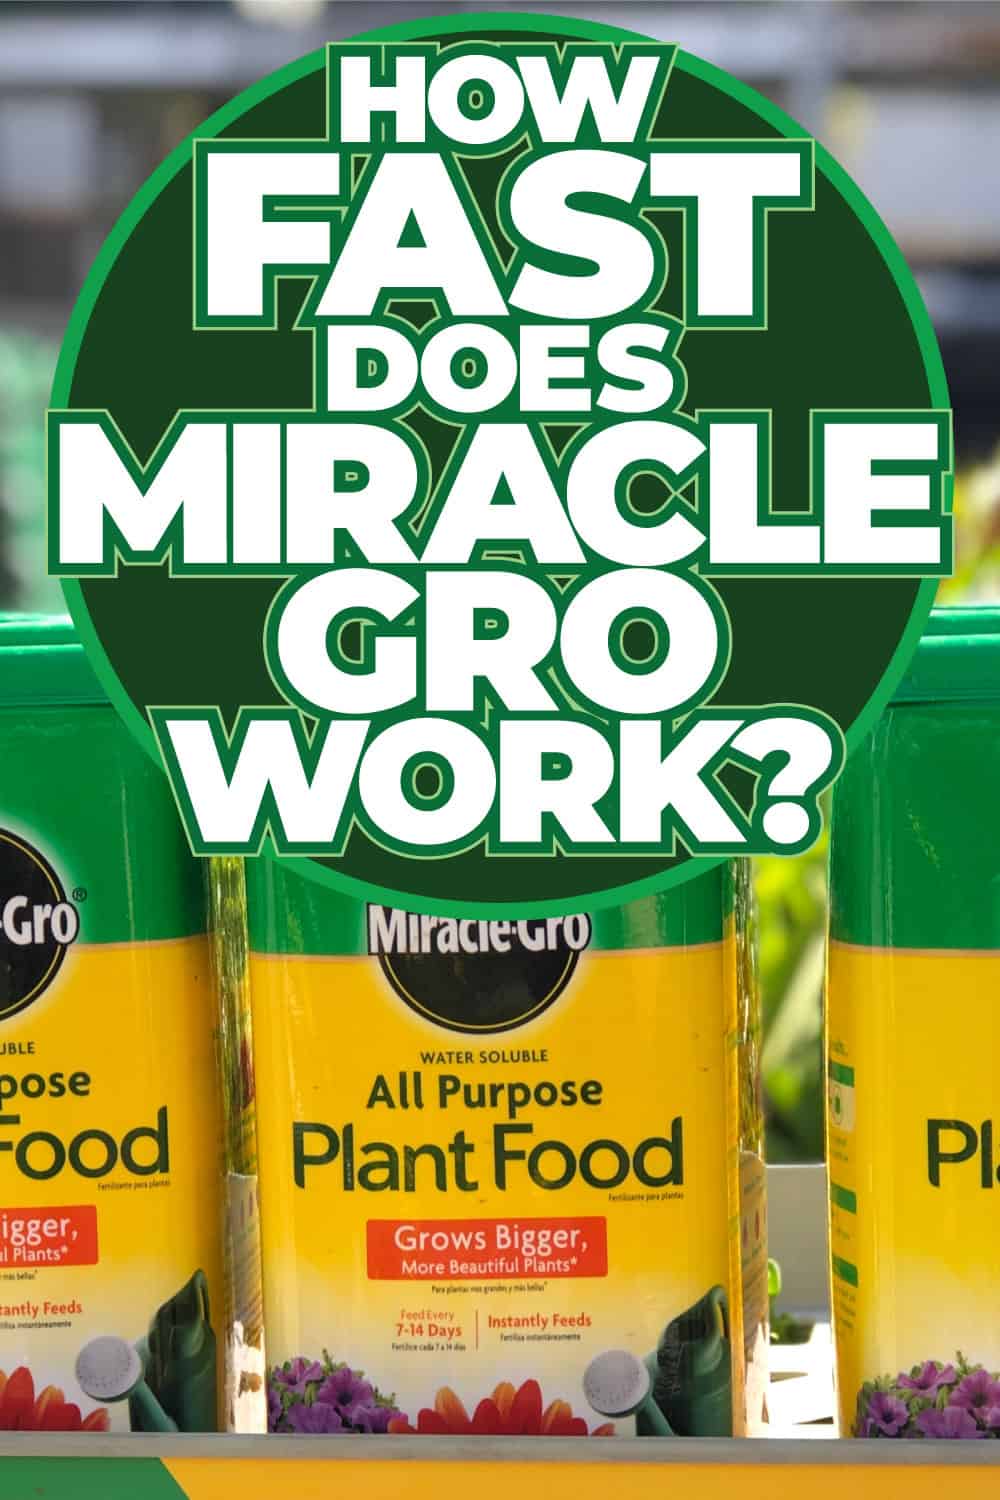 How Fast Does Miracle-Gro Work?